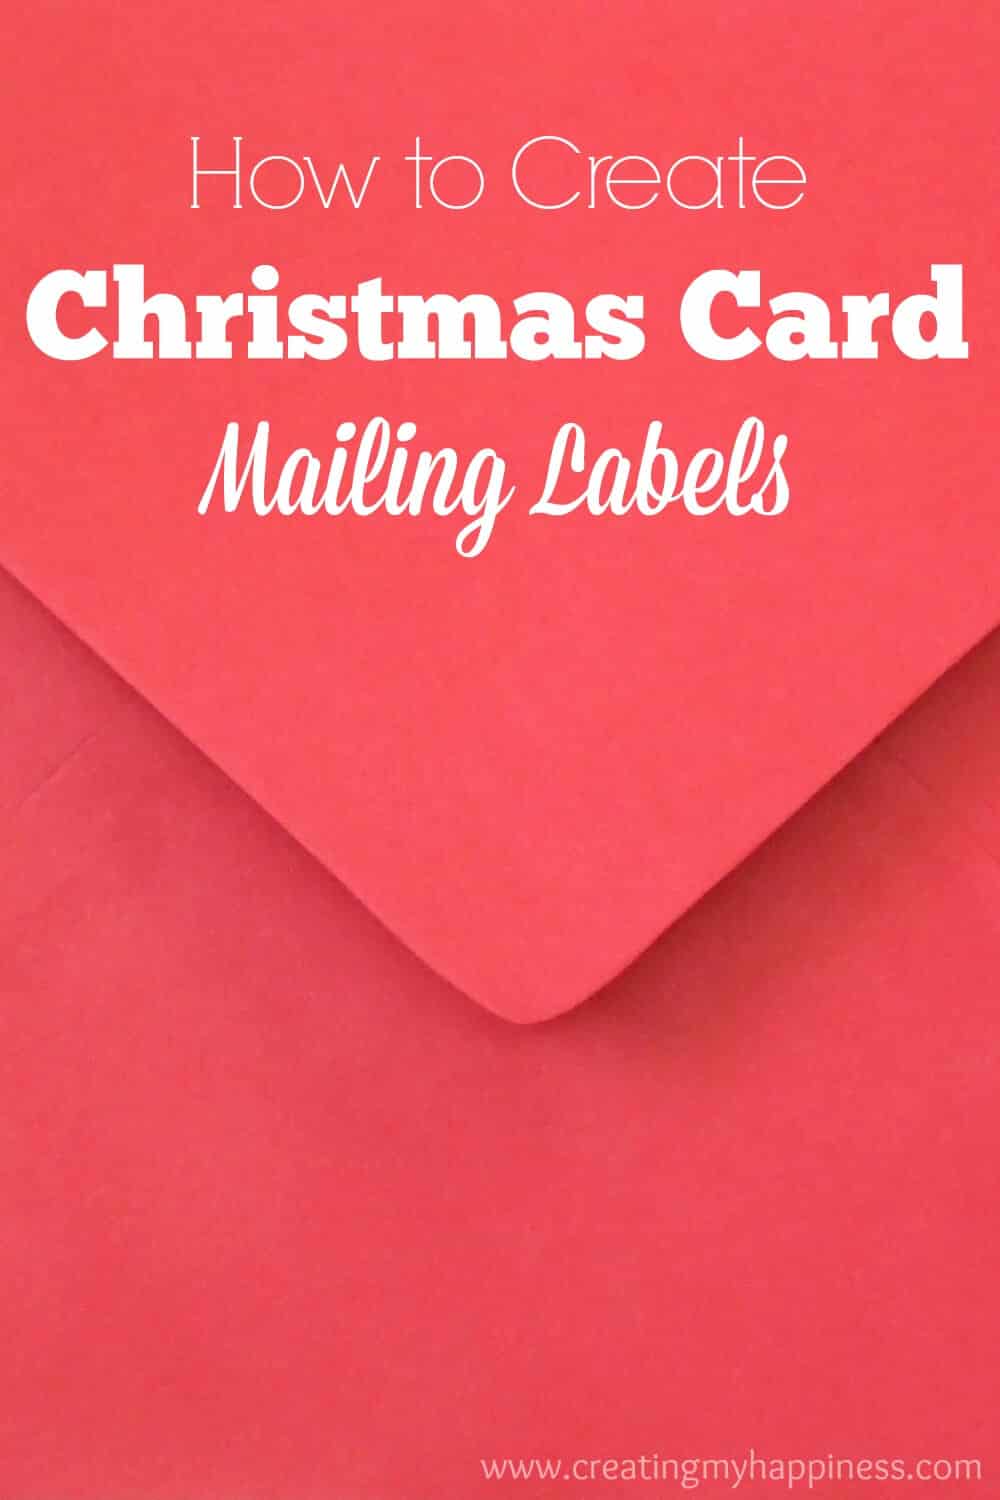 Create and print your own Christmas card mailing labels, and save your hand and your sanity! Free download included.